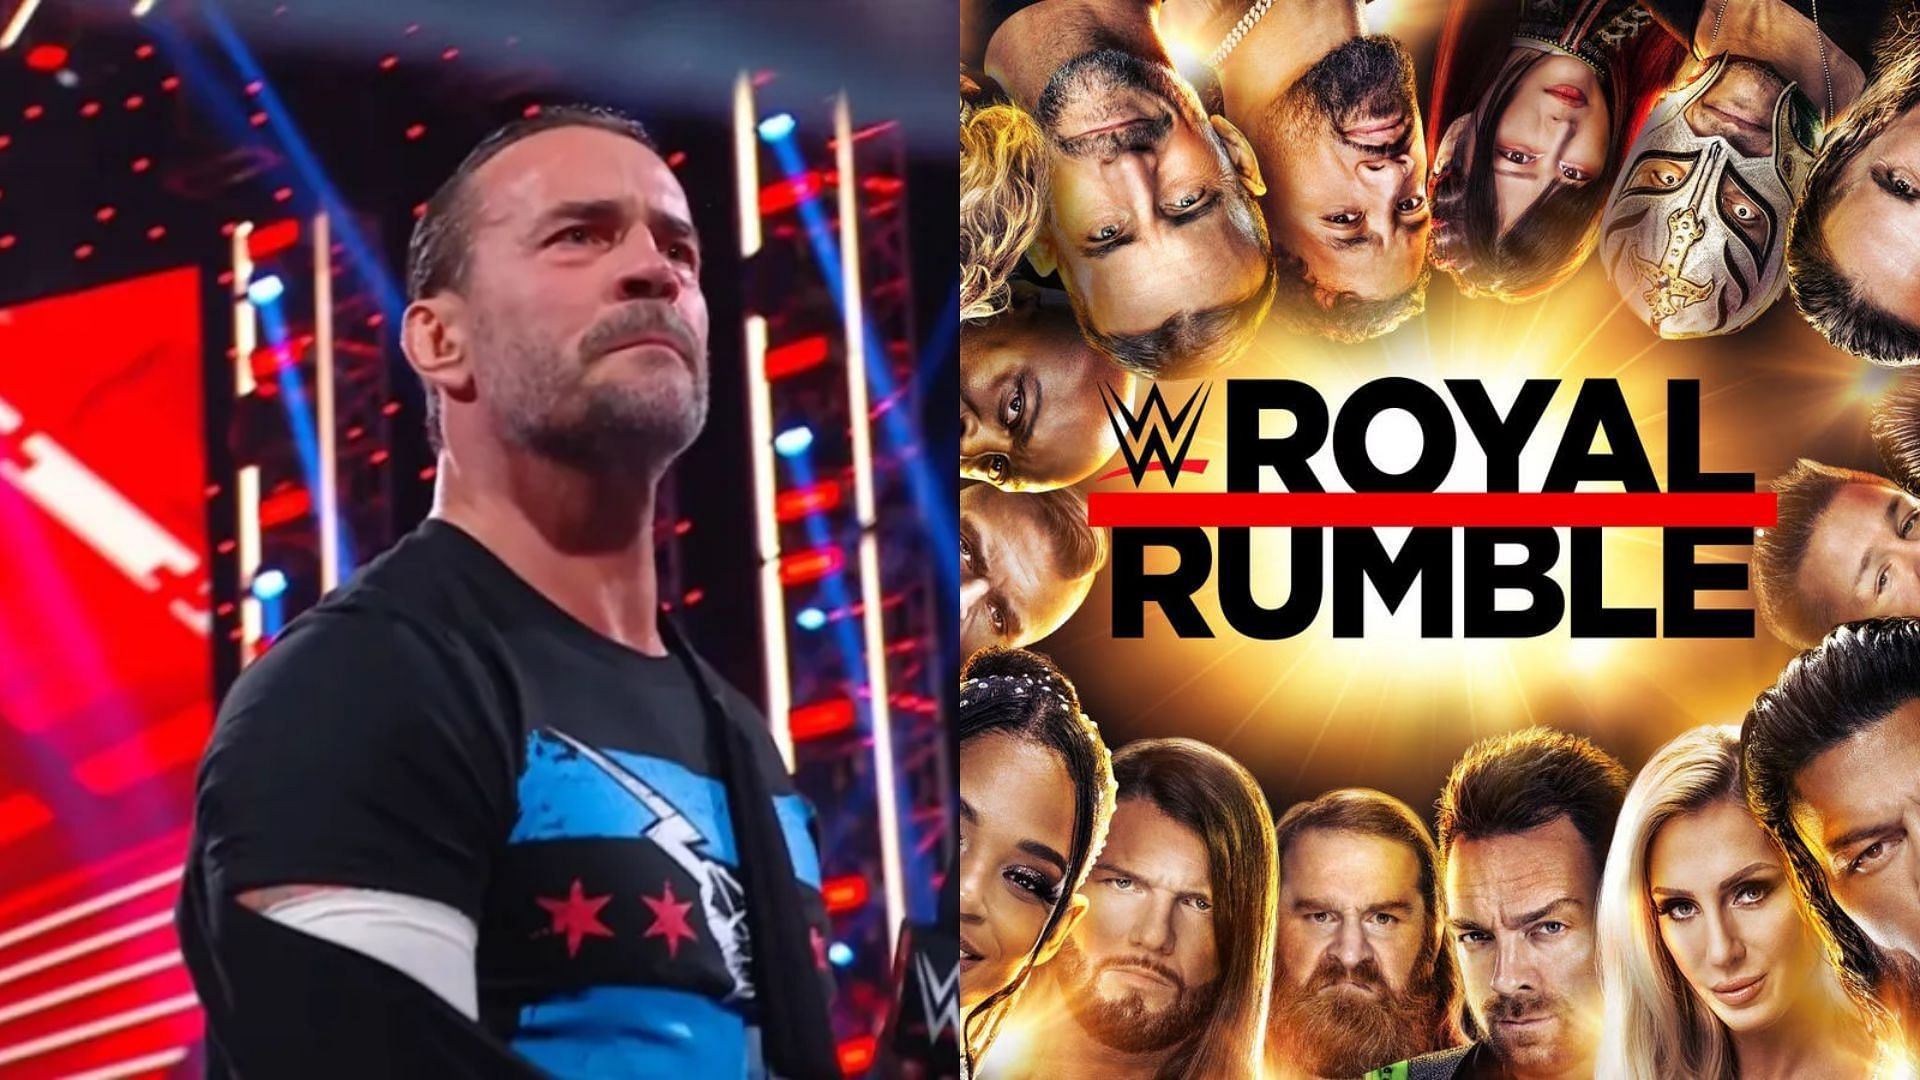 CM Punk was injured during the Royal Rumble 